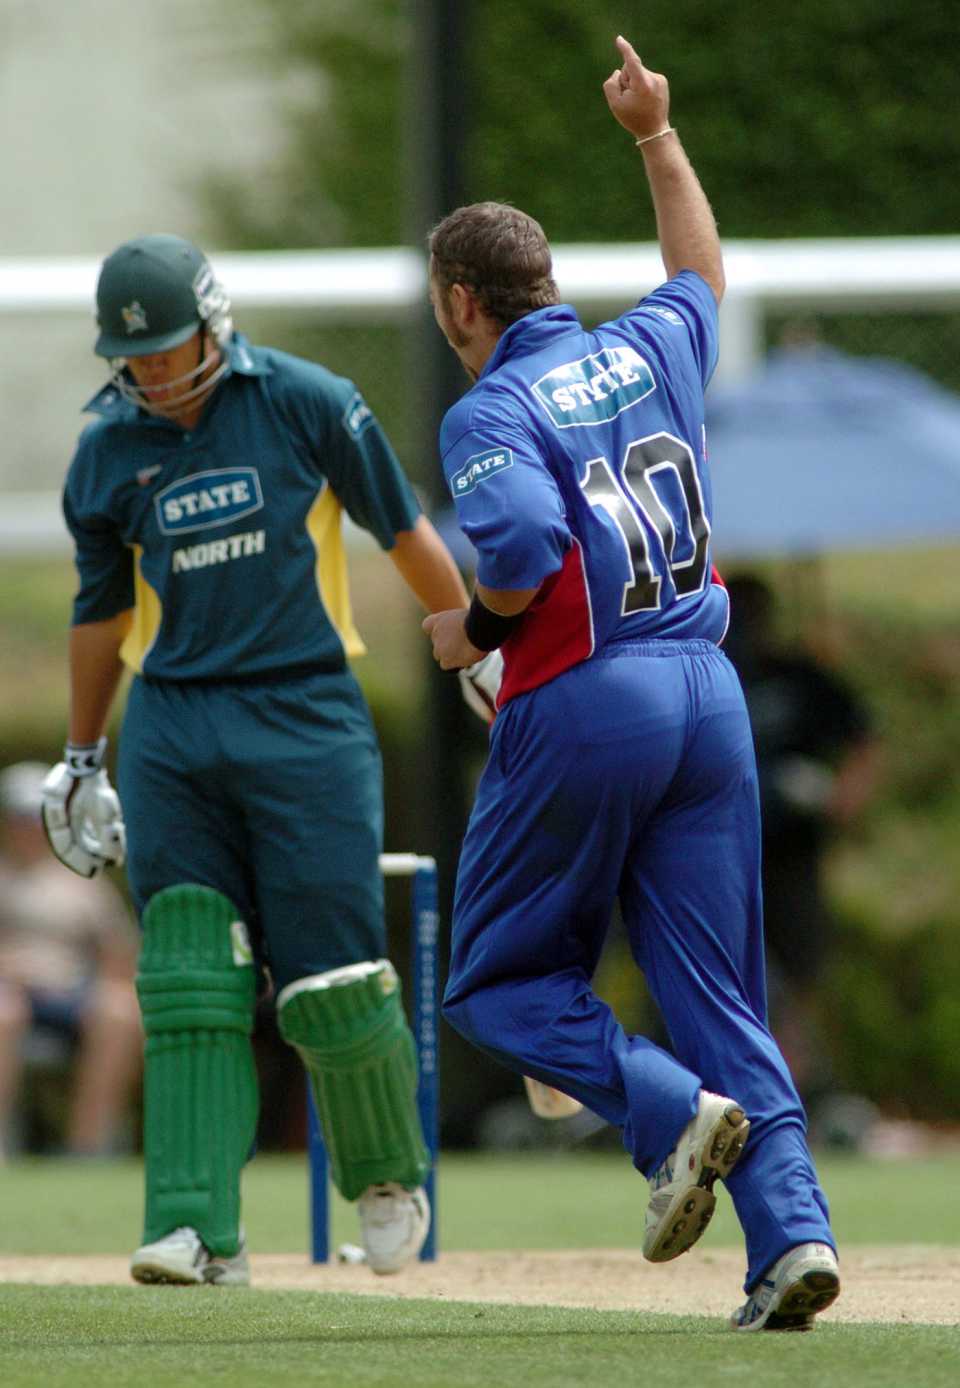 Ross Taylor is caught behind for 2 off Craig McMillan, North Island v South Island, State of Origin, Pukekura Park, February 13, 2005